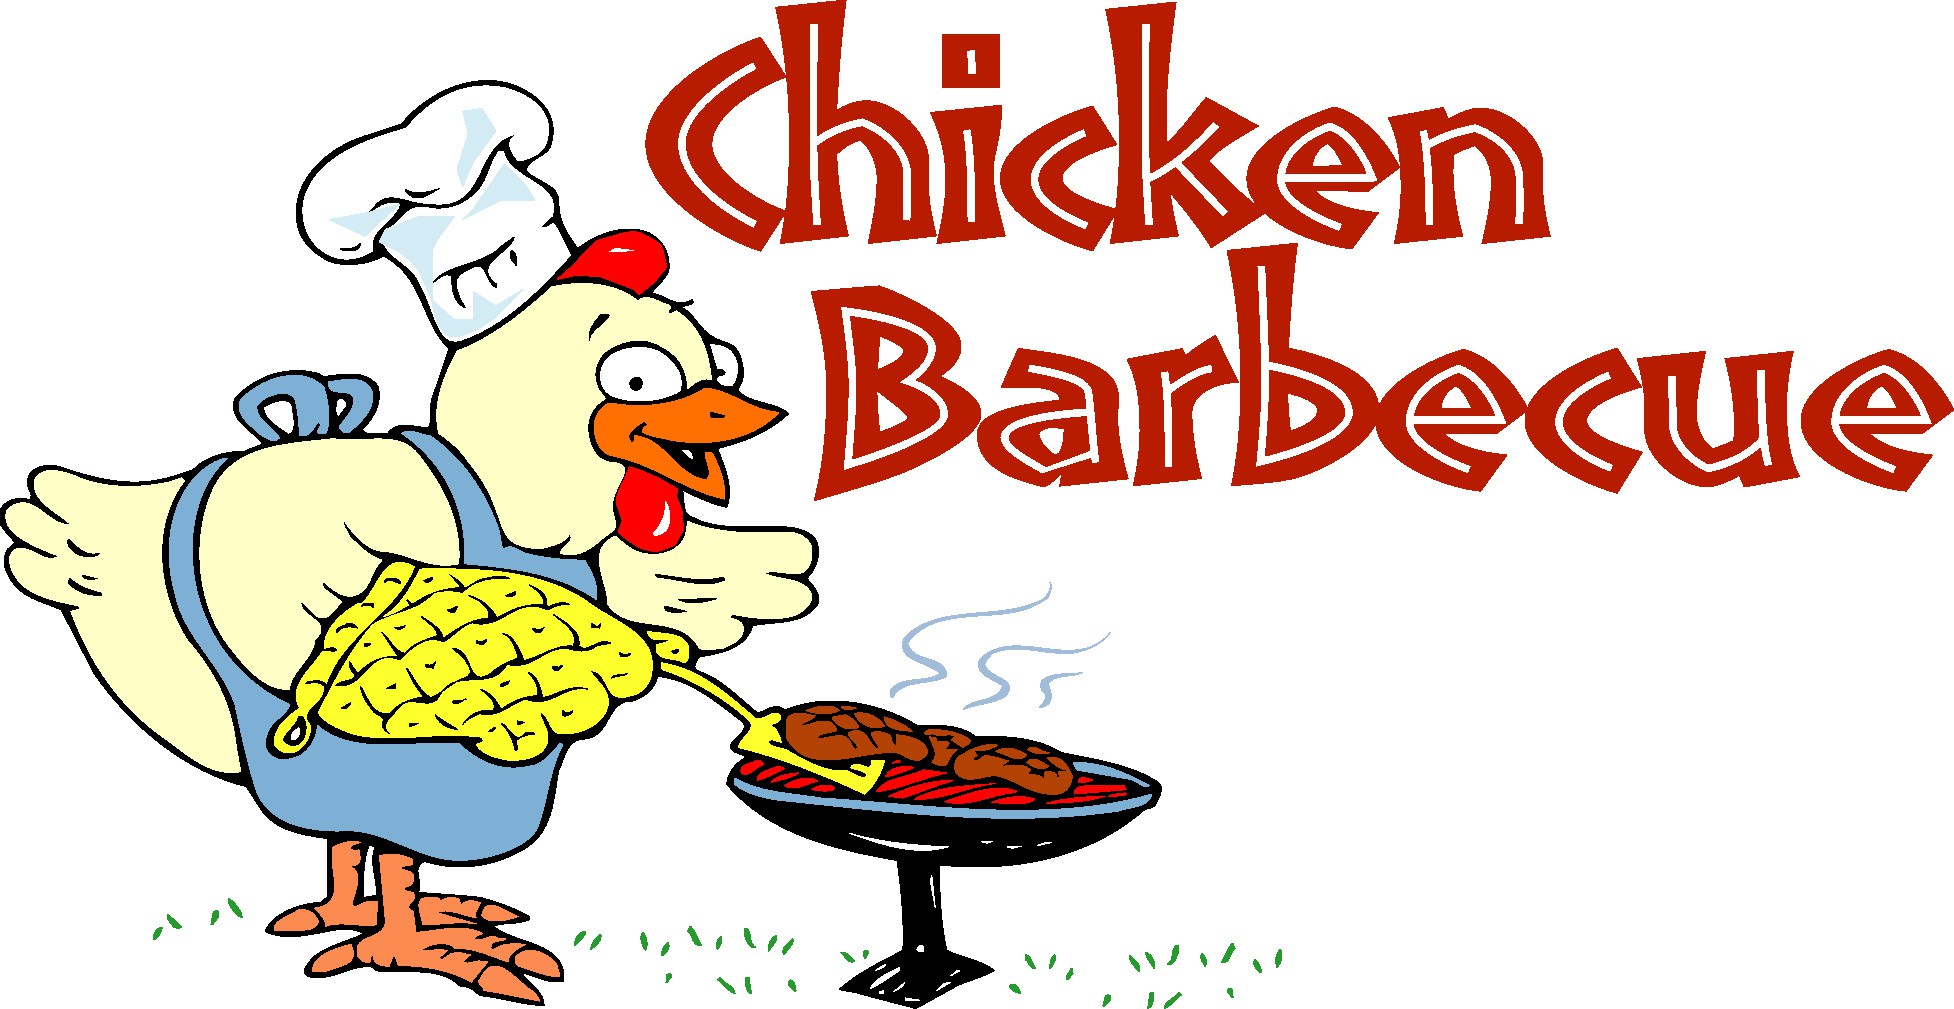 Next week old time. Clipart chicken rib